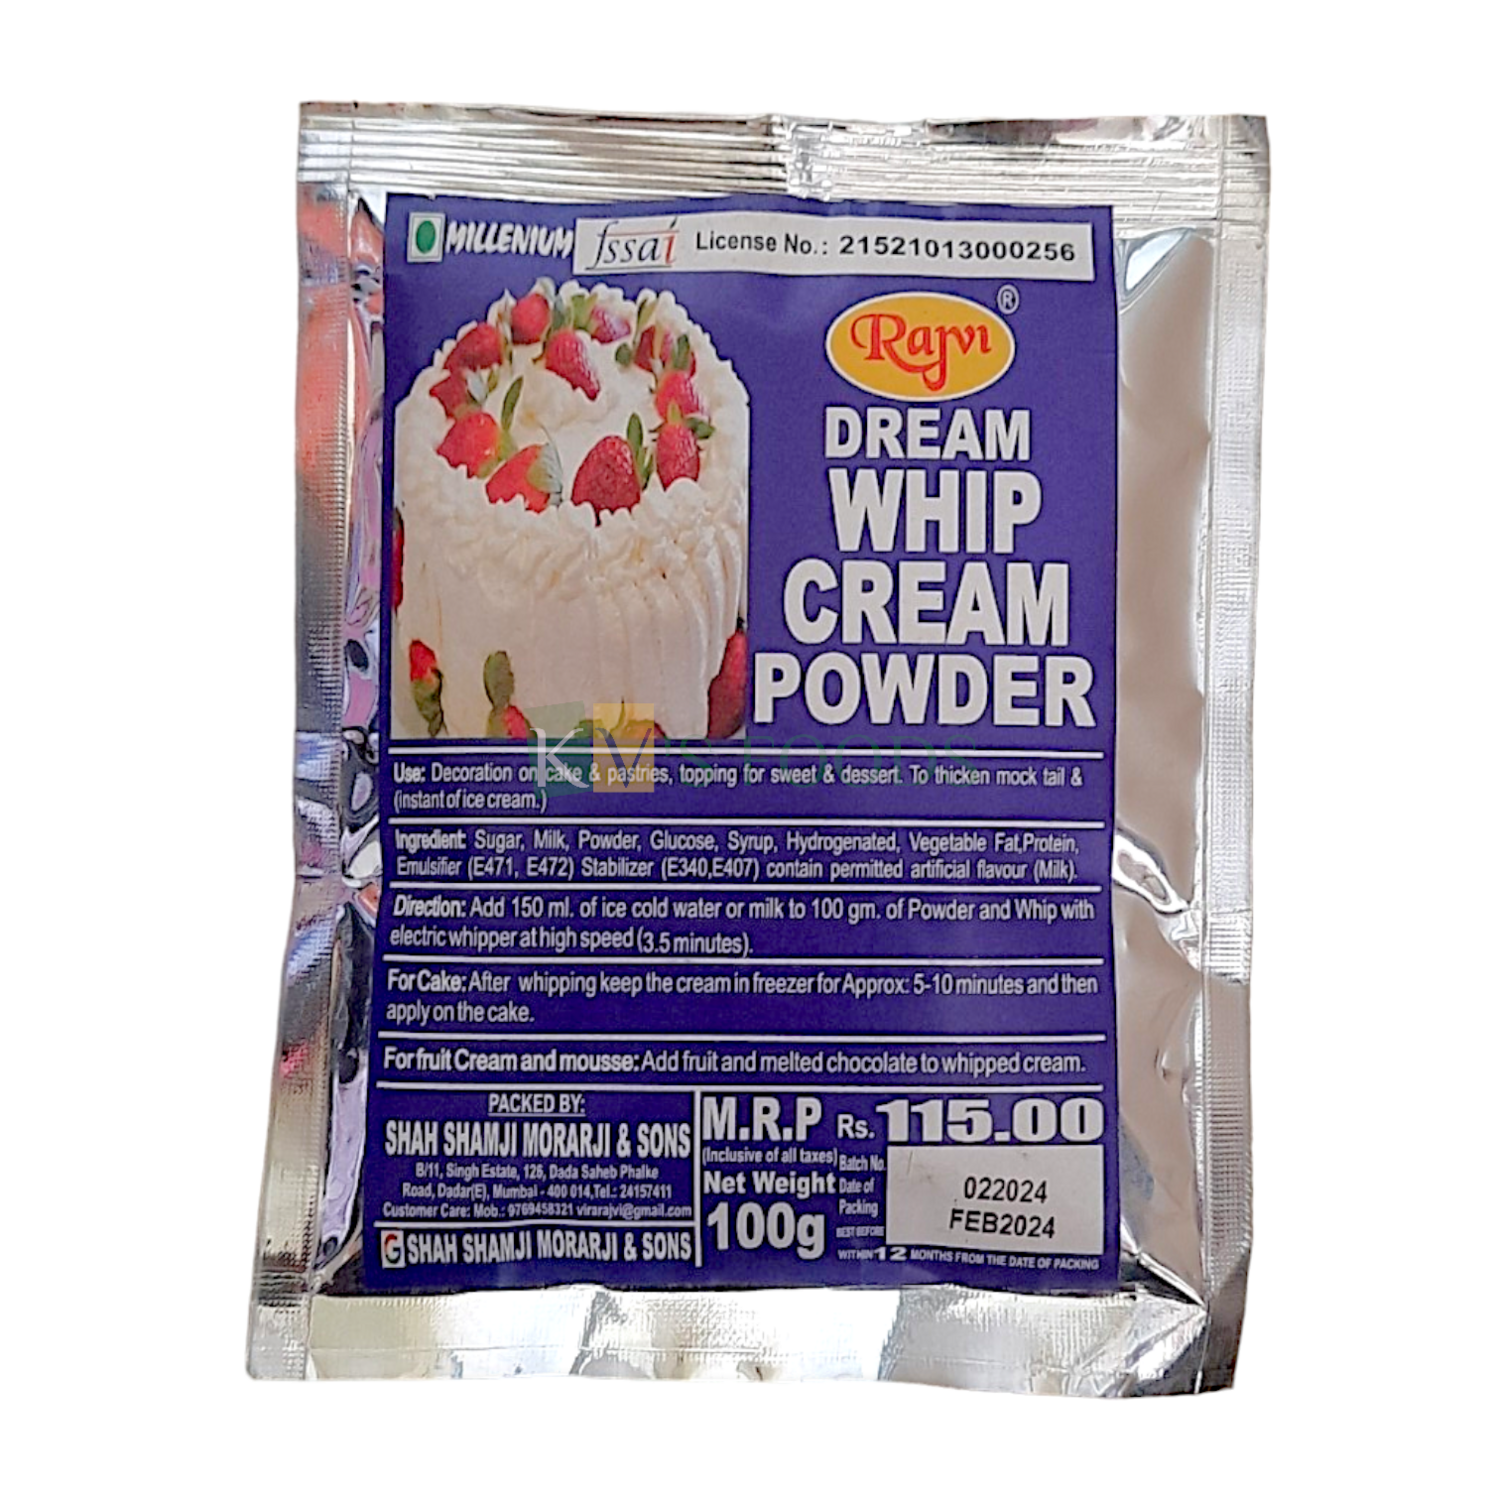 1 PC White Rajvi Whip Cream Powder (100 Gm), Used for Decorating Cakes, Pastries, Topping for Sweets, and Desserts, To thicken Mocktail, Can be used in Fruits and Melted Chocolate DIY Cake Decorations